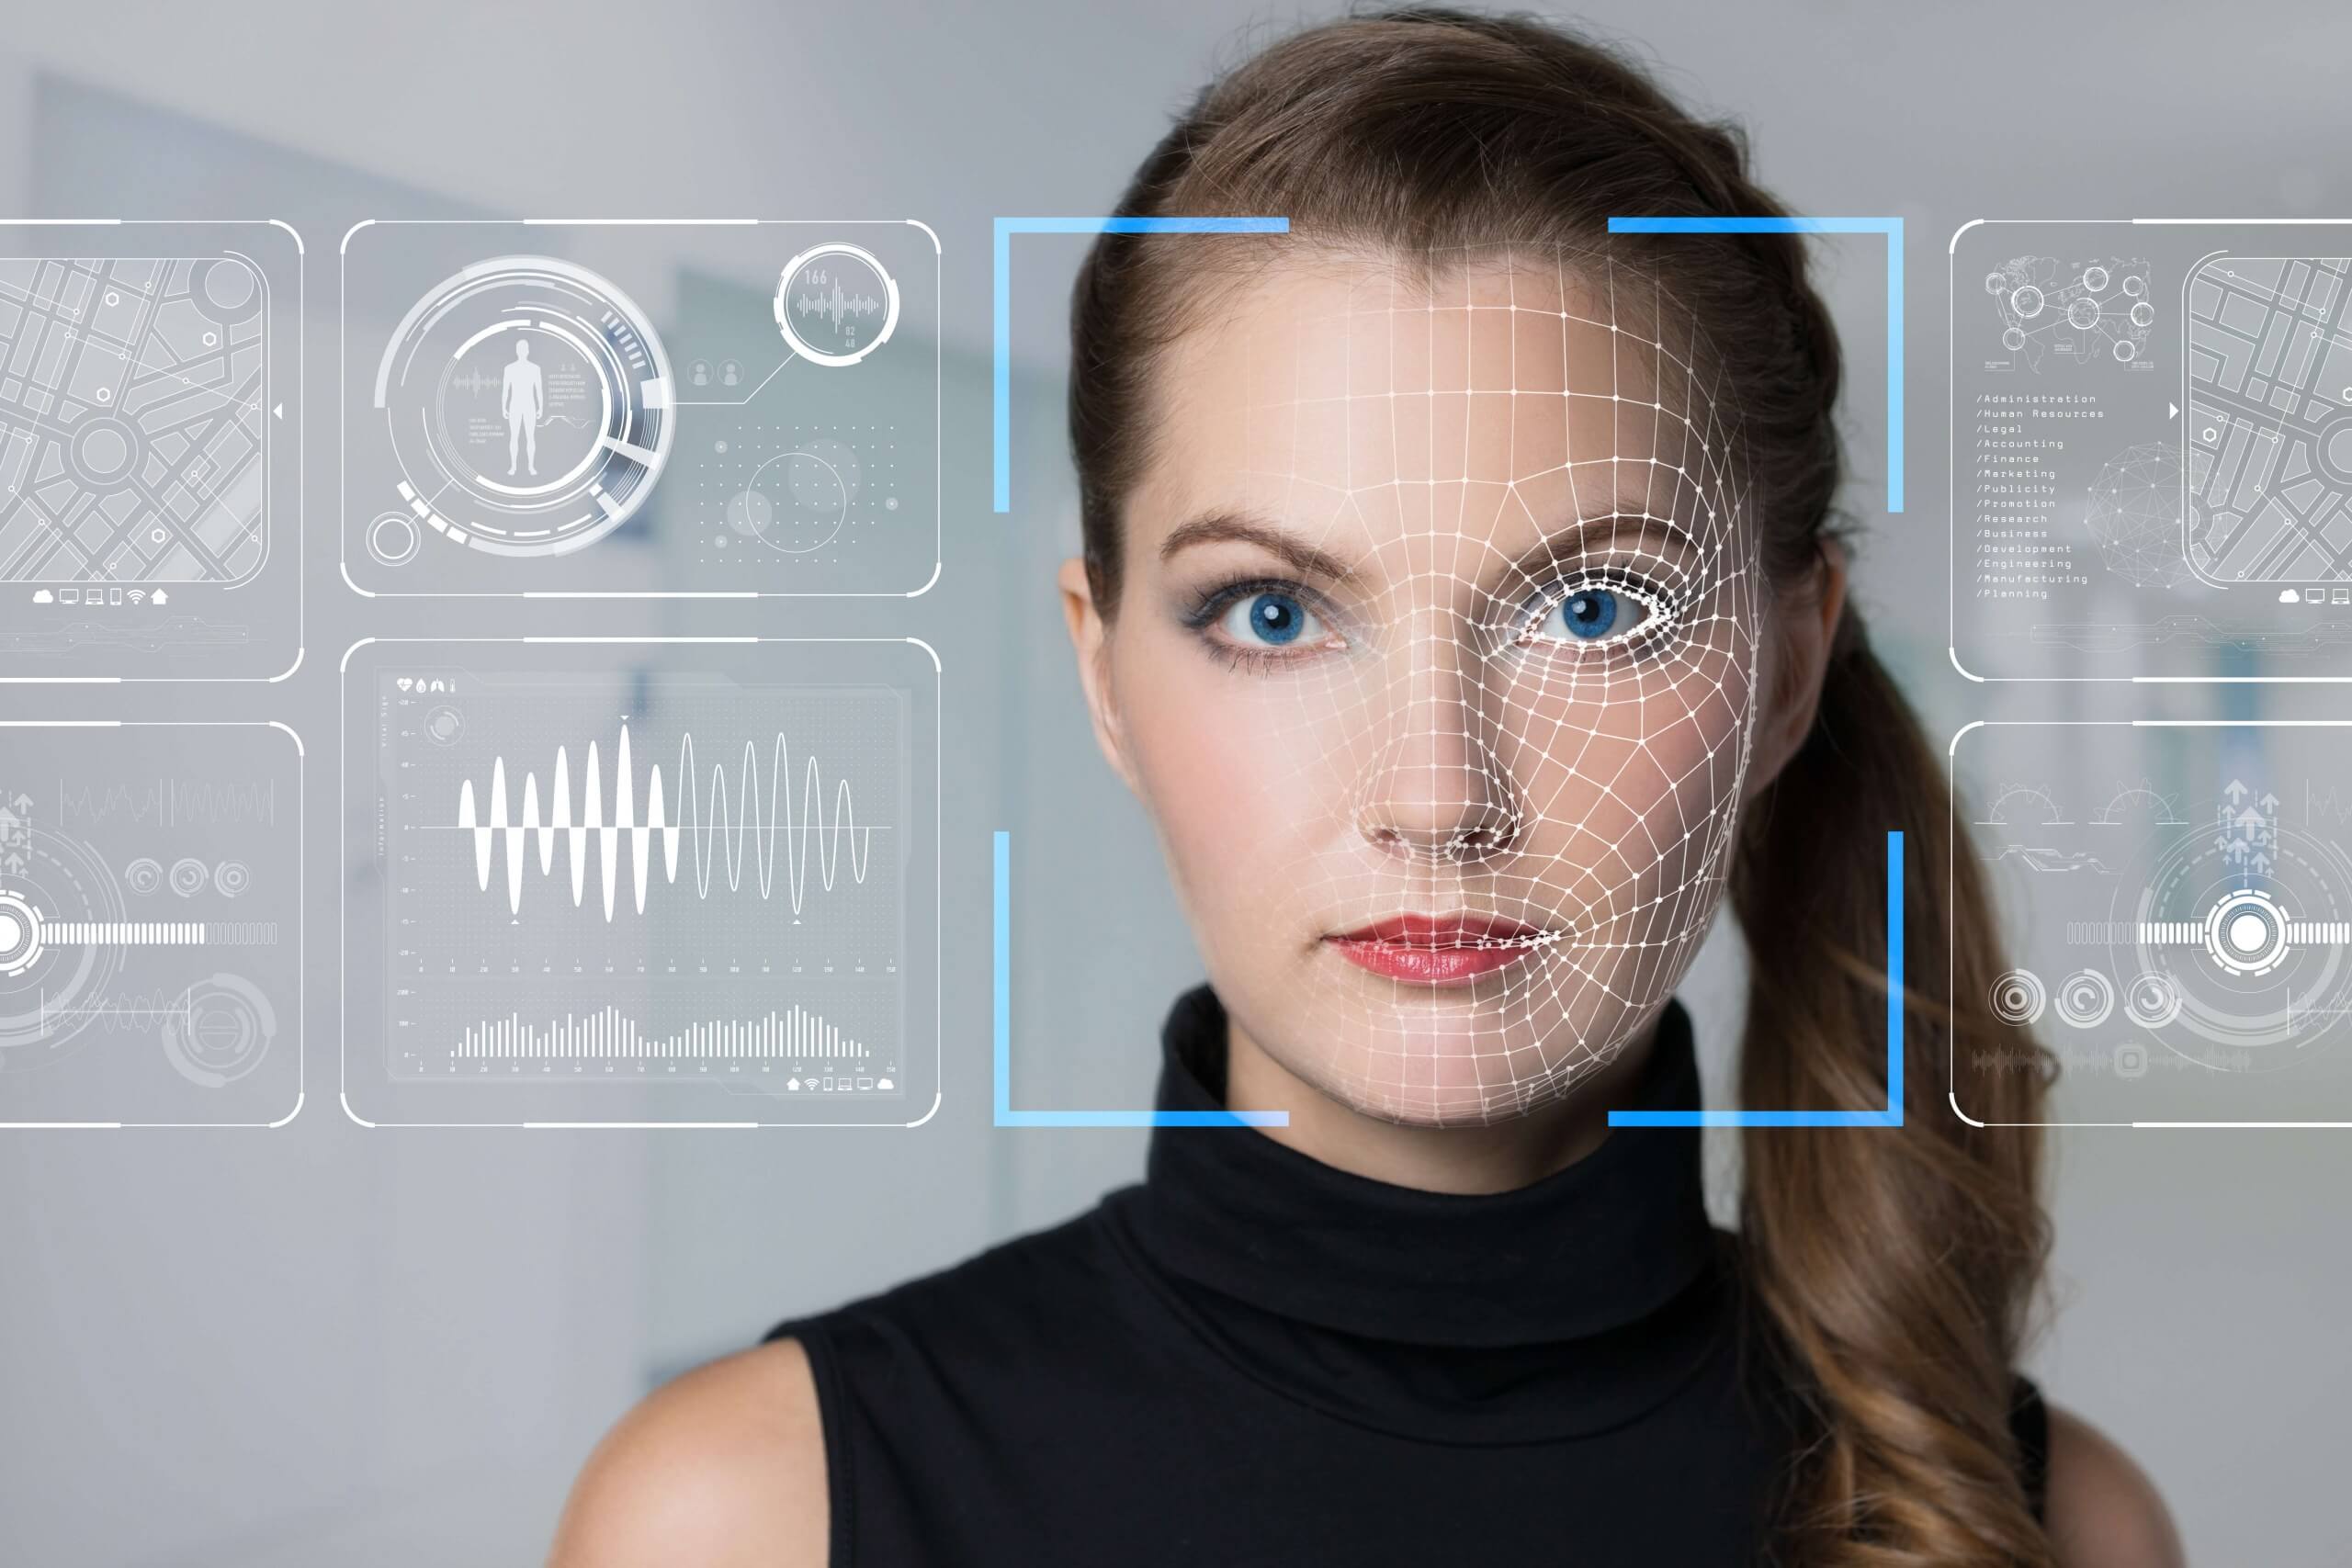 European Commission considers tighter regulation of facial recognition data